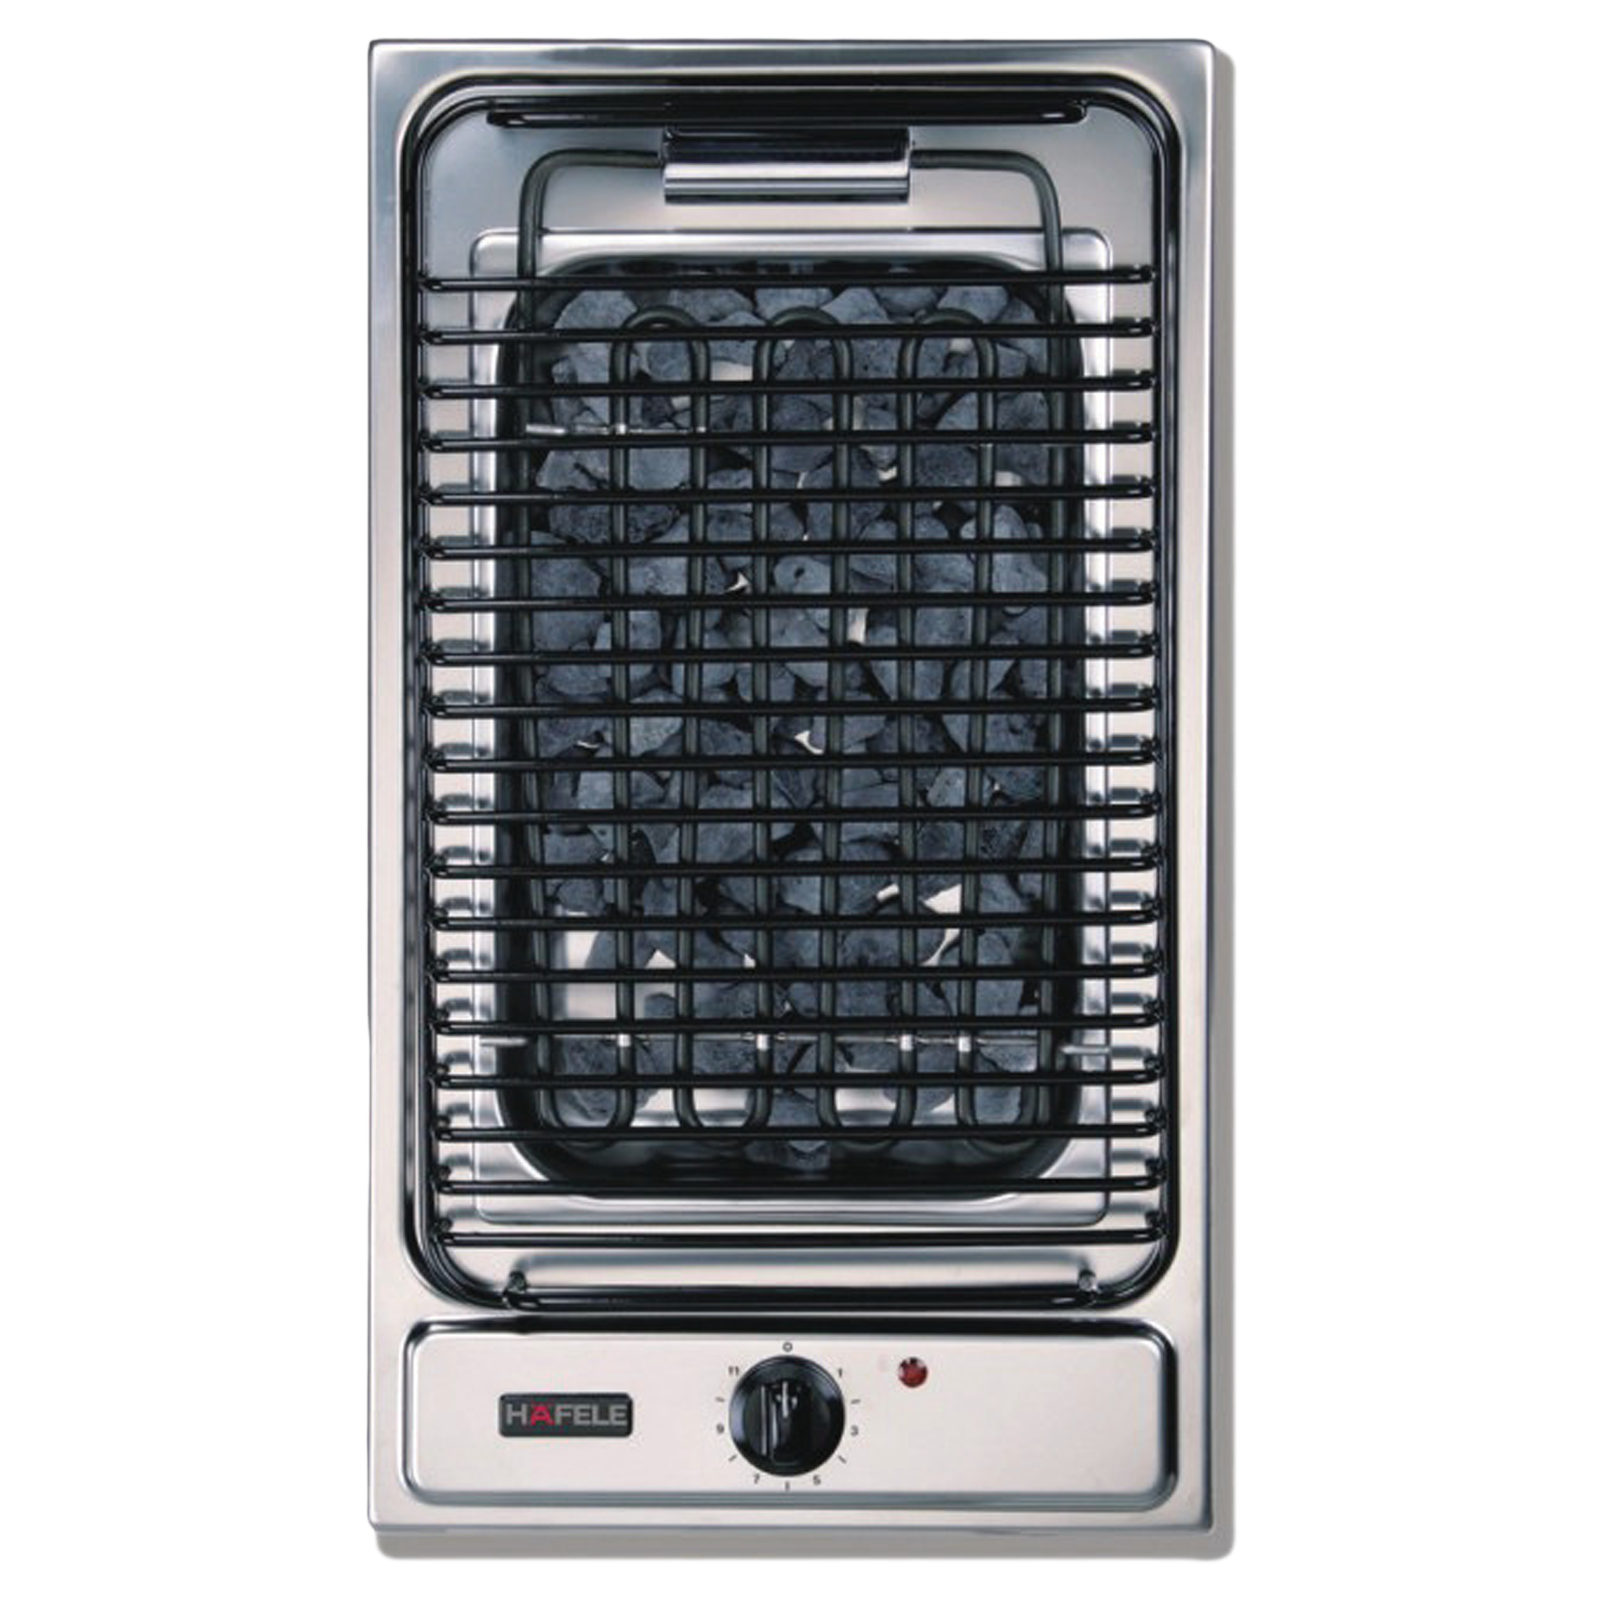 HAFELE BBQ BI 01 Built-In Charcoal Barbeque Griller (Ignition Control Knob)